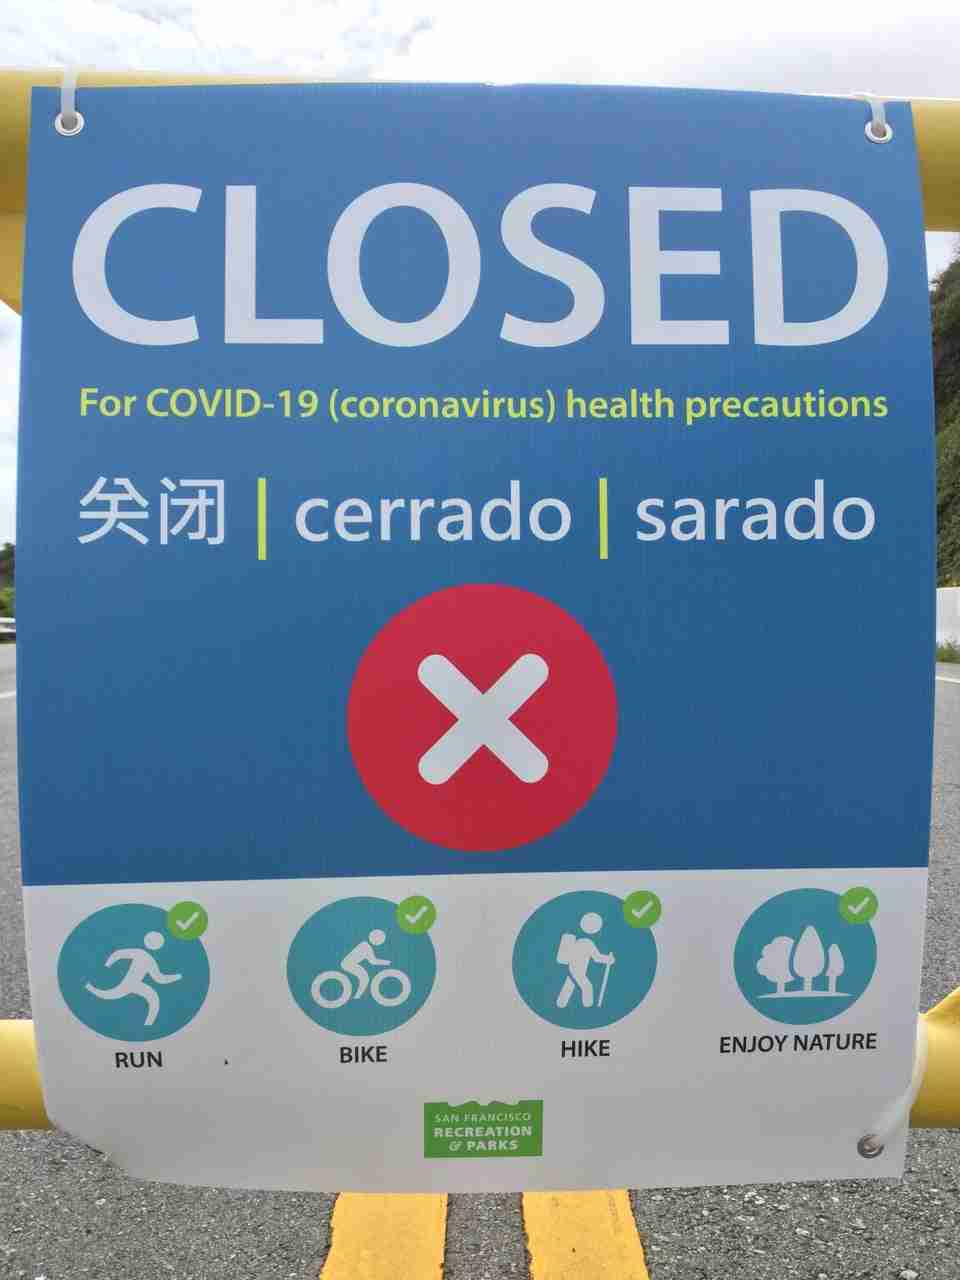 Close-up of a sign stating CLOSED For COVID-19 (coronavirus) health precautions, translations in Chinese & Spanish, a big red circle with a white x in the middle, and below that a row of four icons of activities with checkmarks (white on green background) in their top right corners, for run, bike, hike, and enjoy nature, below those a small San Francisco Recreation & Parks logo.